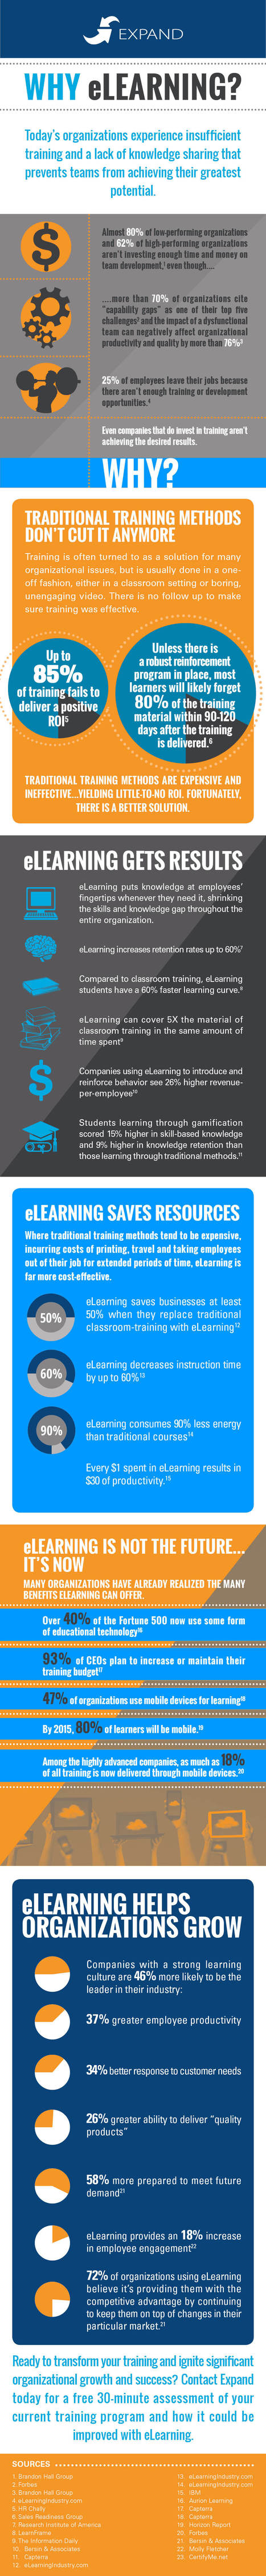 Why eLearning? [Infographic] | Digital Delights - Digital Tribes | Scoop.it